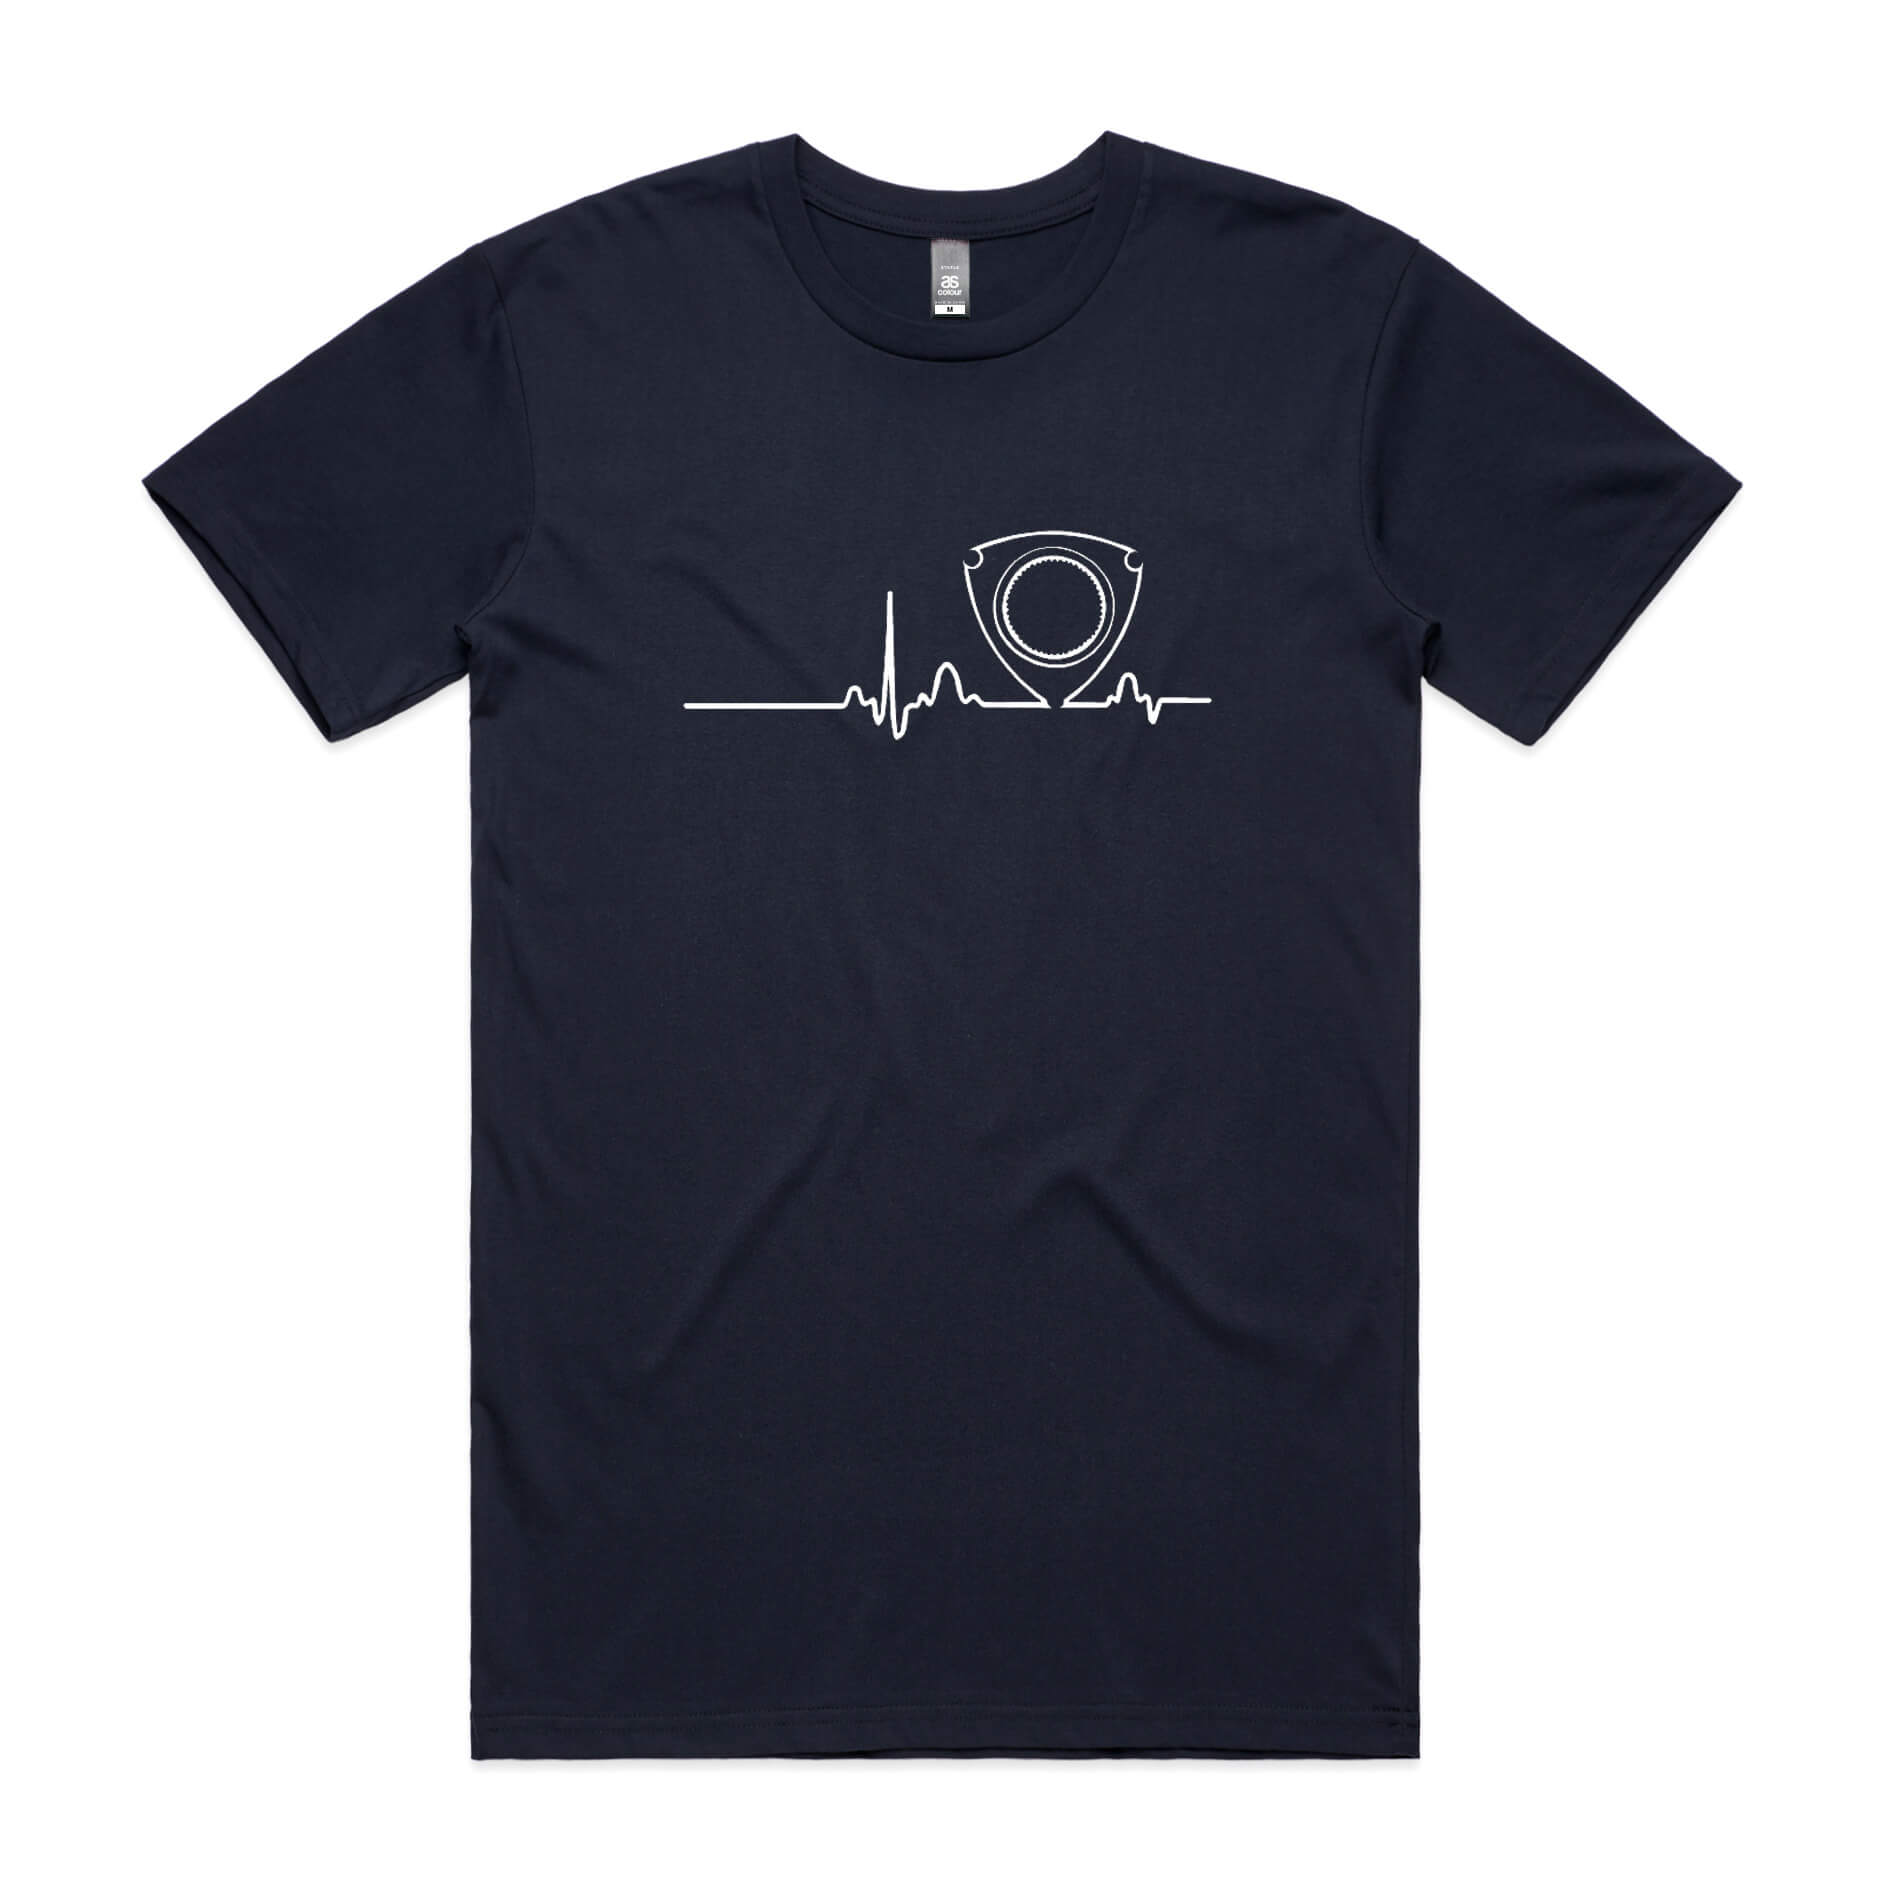 Rotary pulse t-shirt in navy blue